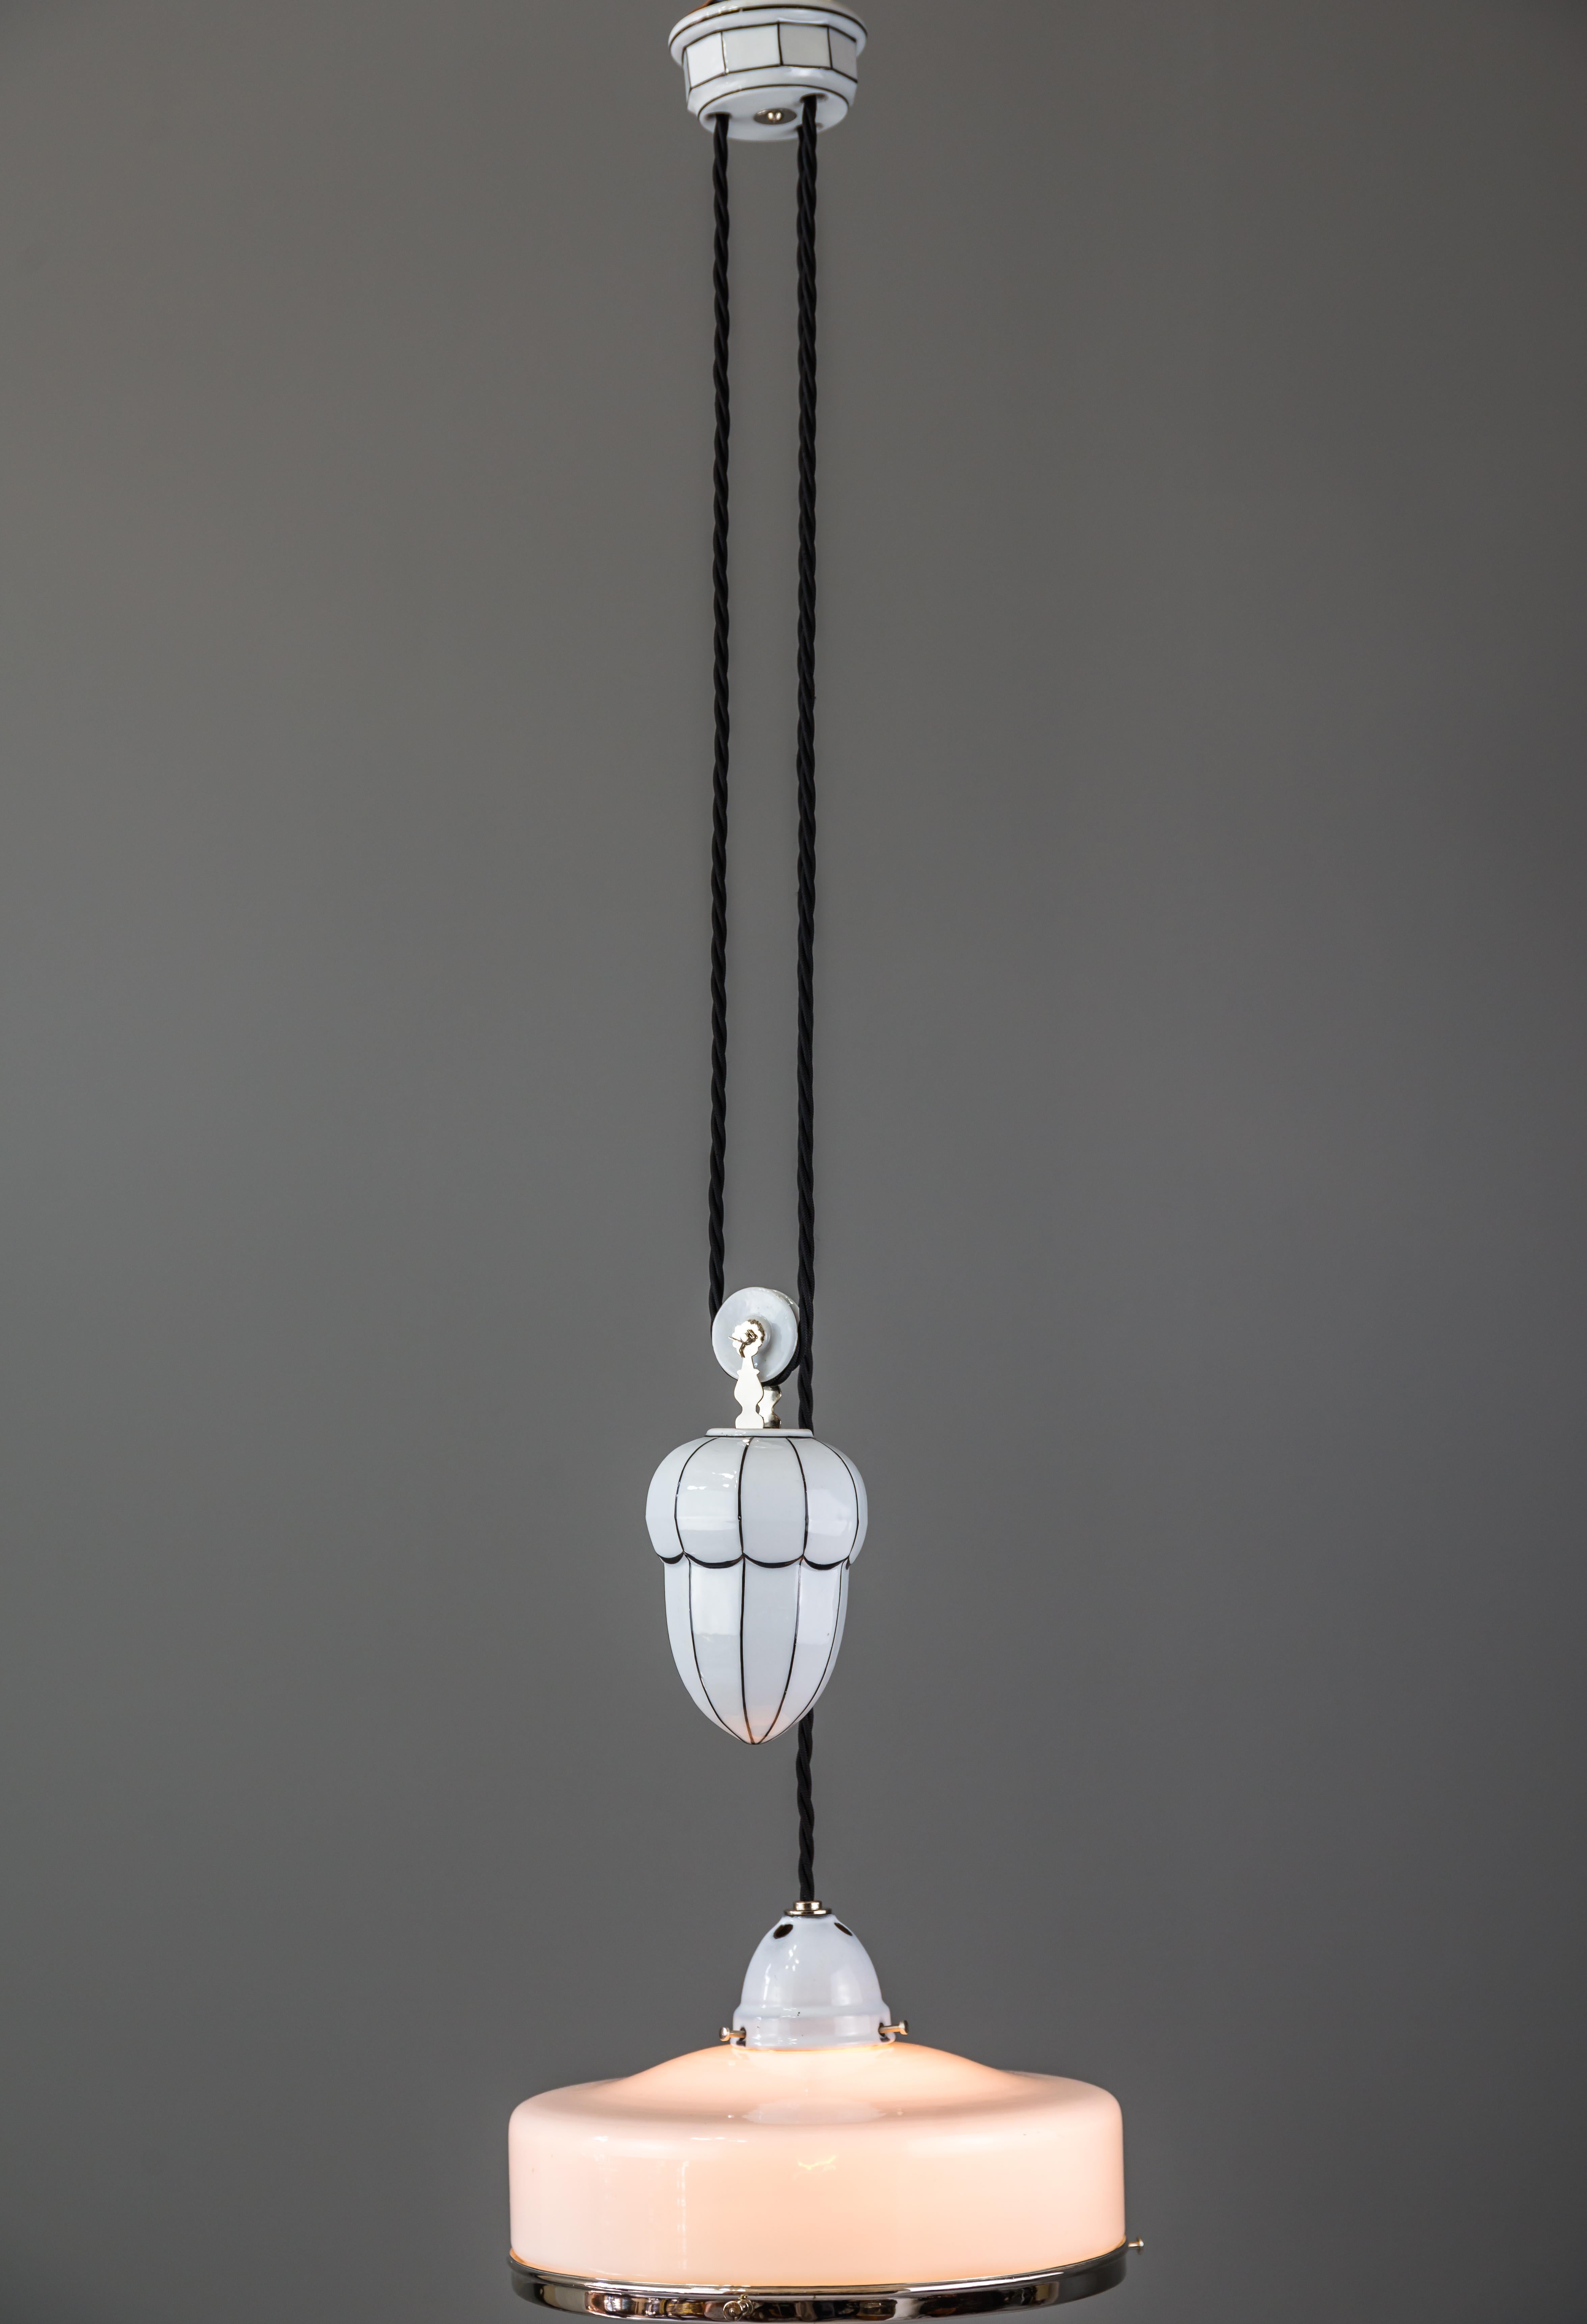 Bauhaus Adjustable Porcelain Chandelier with Original Shade, circa 1920s In Good Condition For Sale In Wien, AT